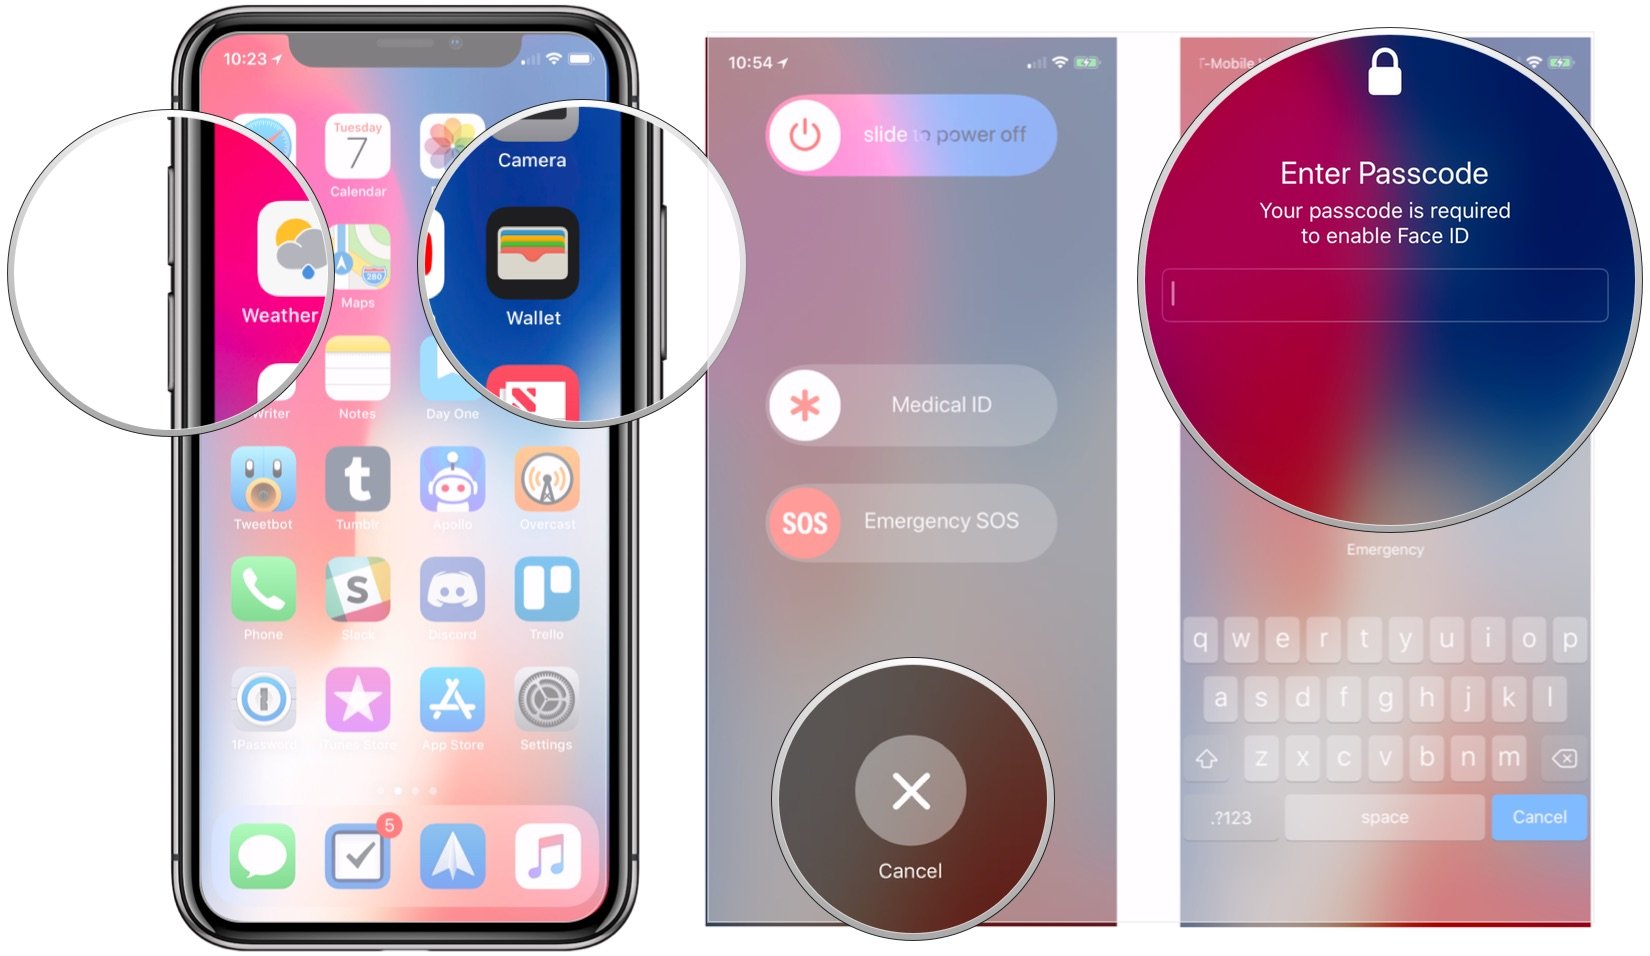 Temporarily disable Face ID or Touch ID: Press and hold Side and volume buttons, tap Cancel, enter password